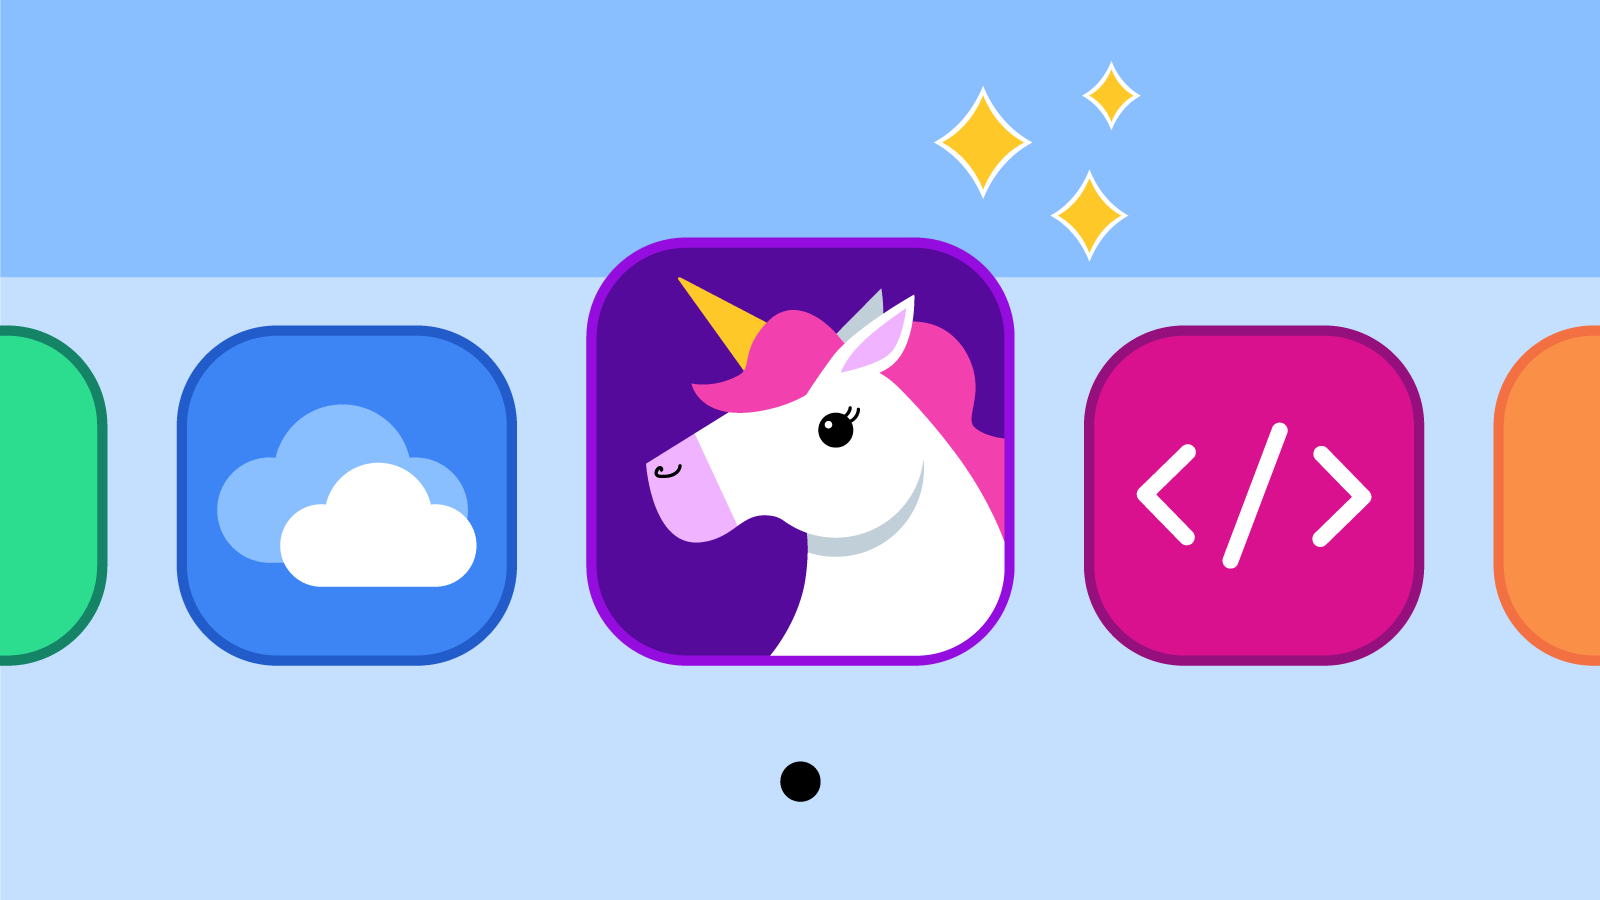 An illustration of a computer doc with a Unicorn app icon representing our ideal web design tool.